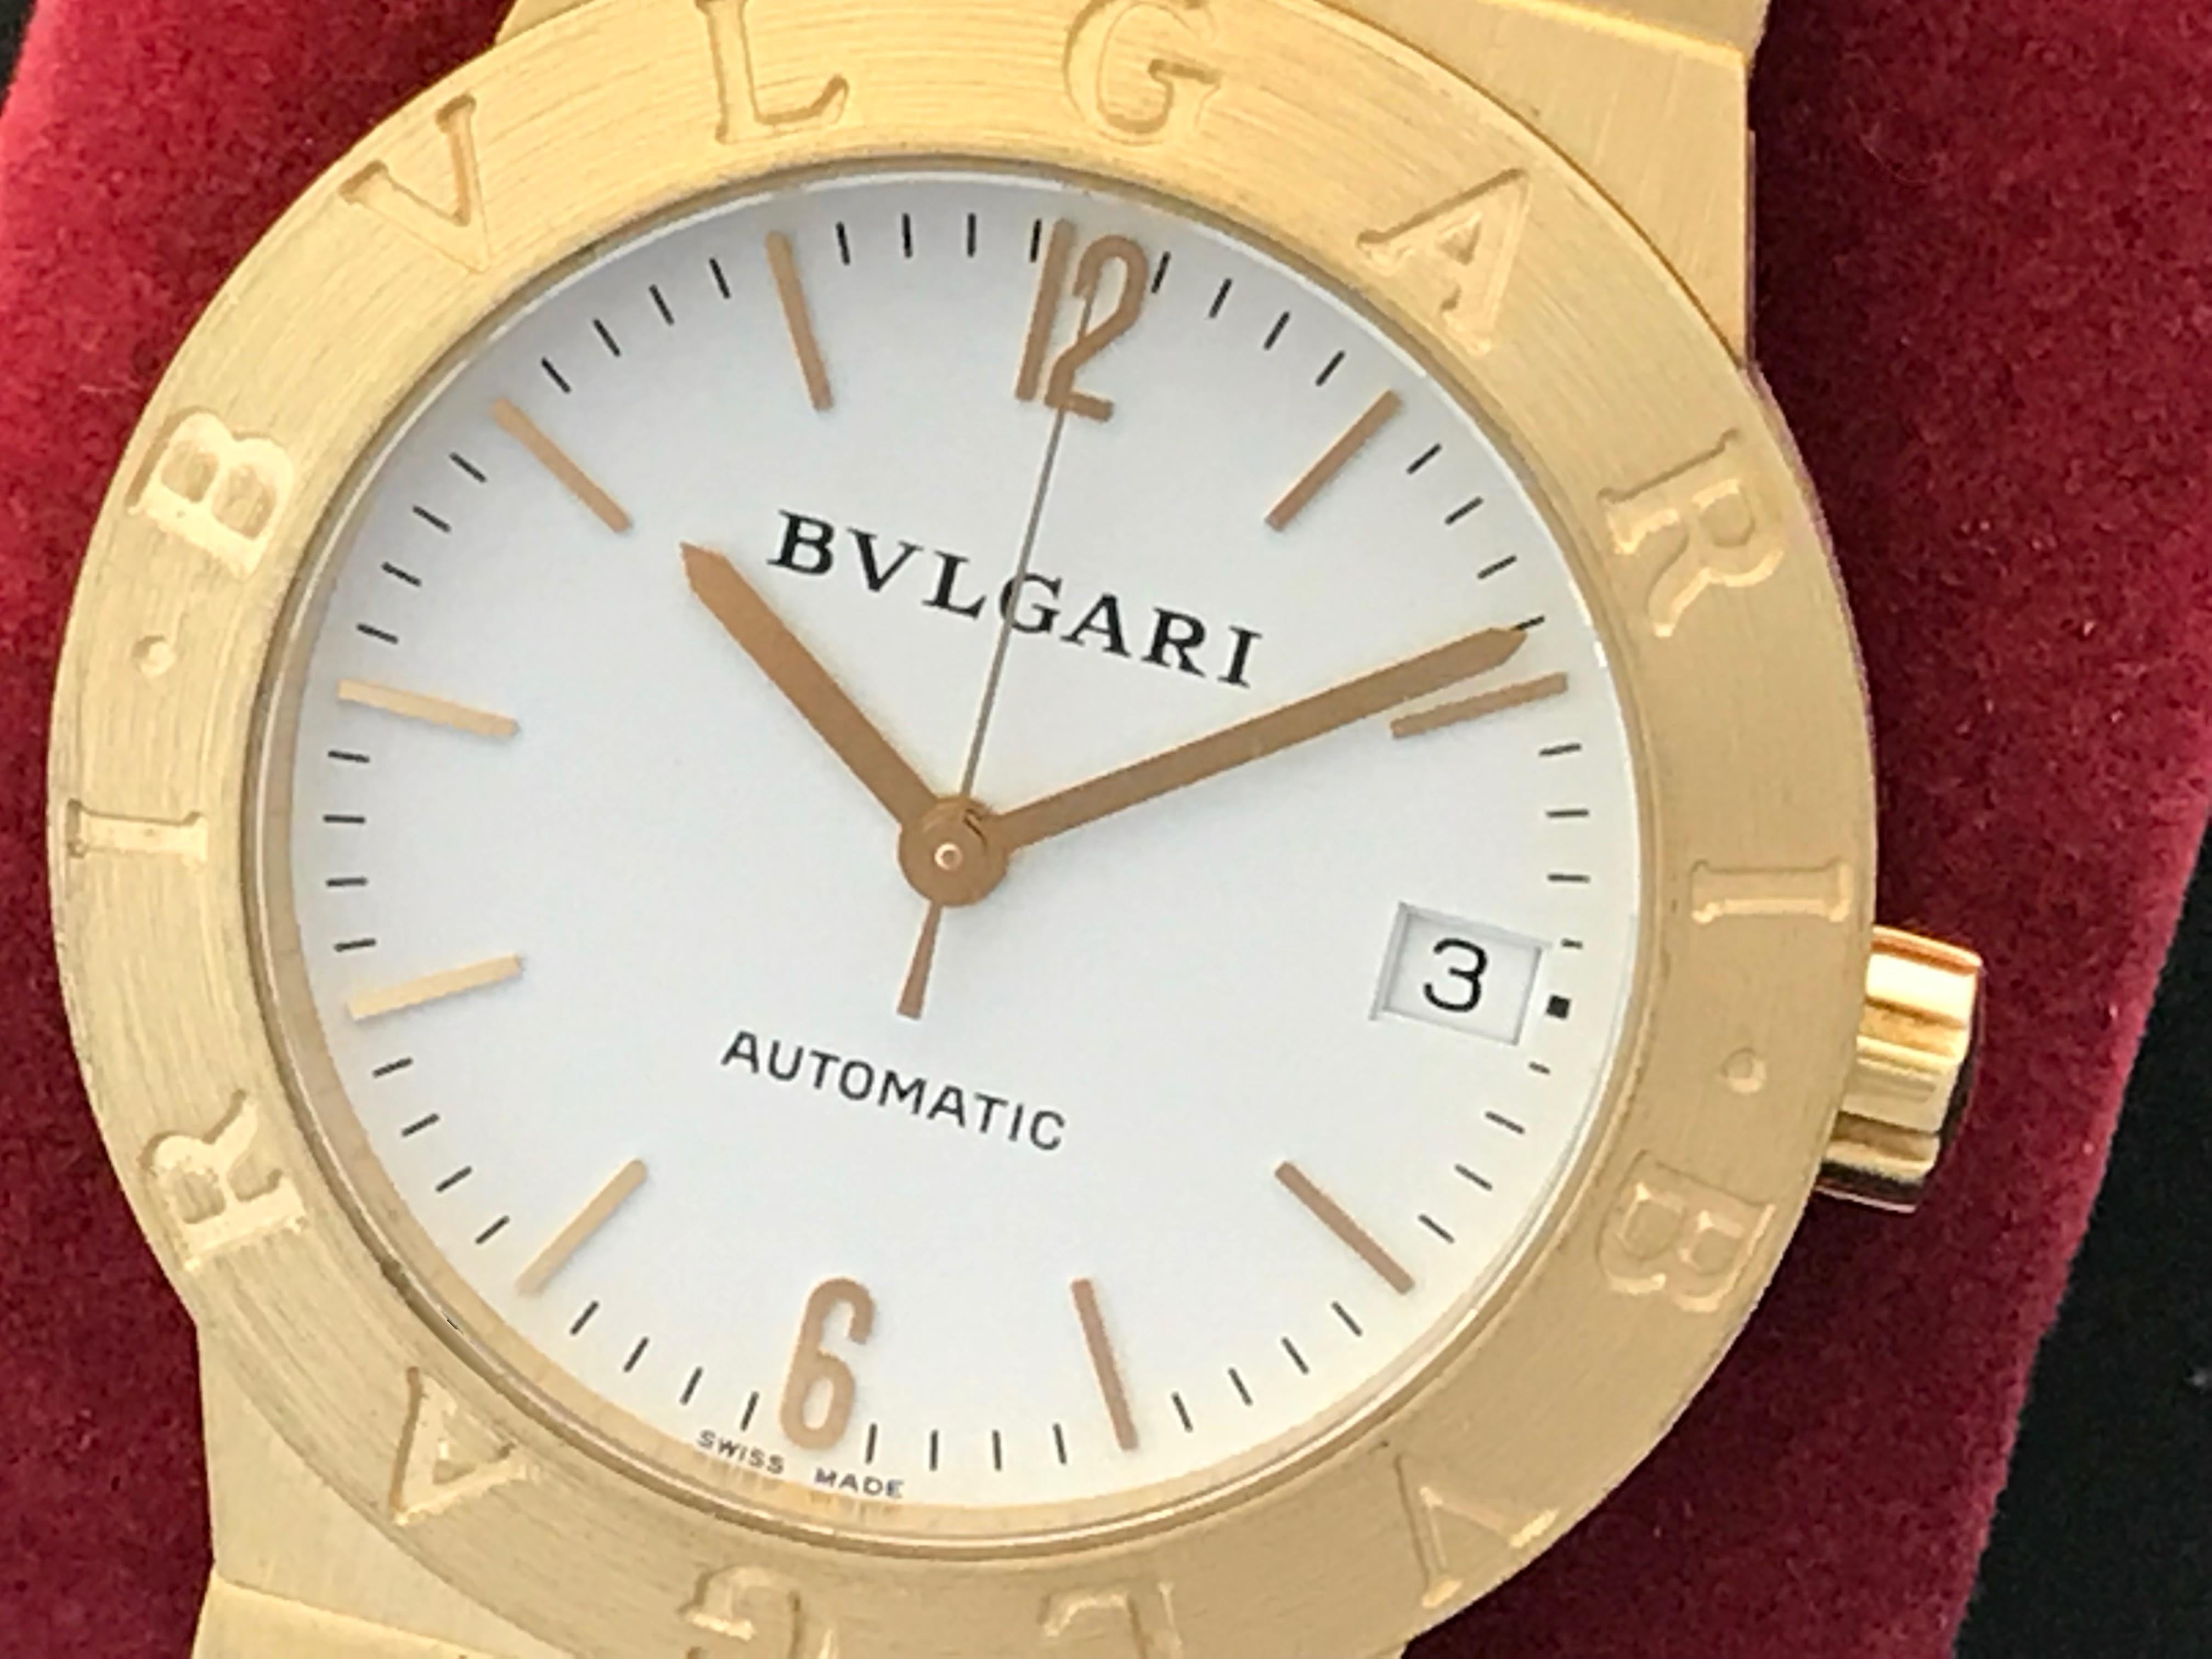 Bvlgari Diagono Mens 18k Yellow Gold Wristwatch Model LC35G. Automatic Winding movement with Date. 18k Yellow gold case (36mm dia.). White Dial with yellow gold hour markers and Arabic numerals. Brown leather strap with 18k Yellow Gold Bvlgari